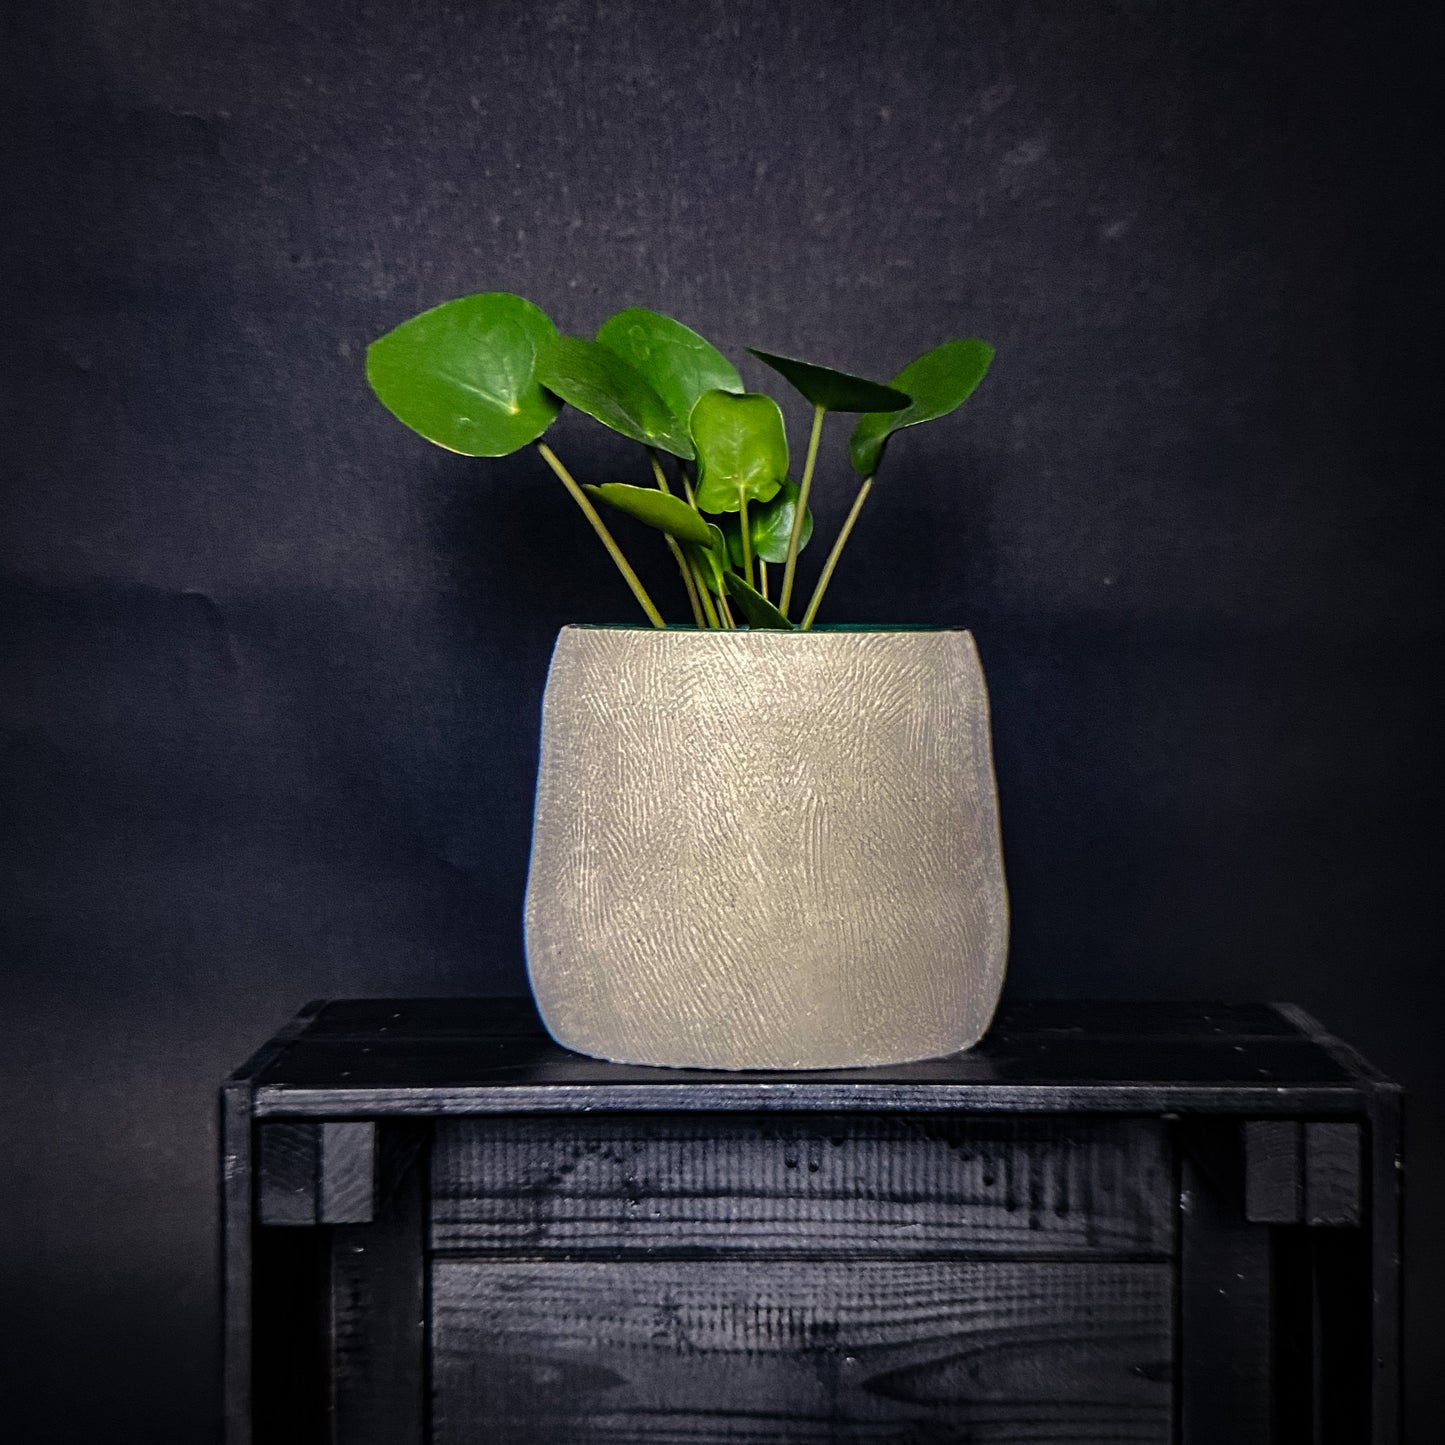 Plantpot holder - White clay, rough and textured finish